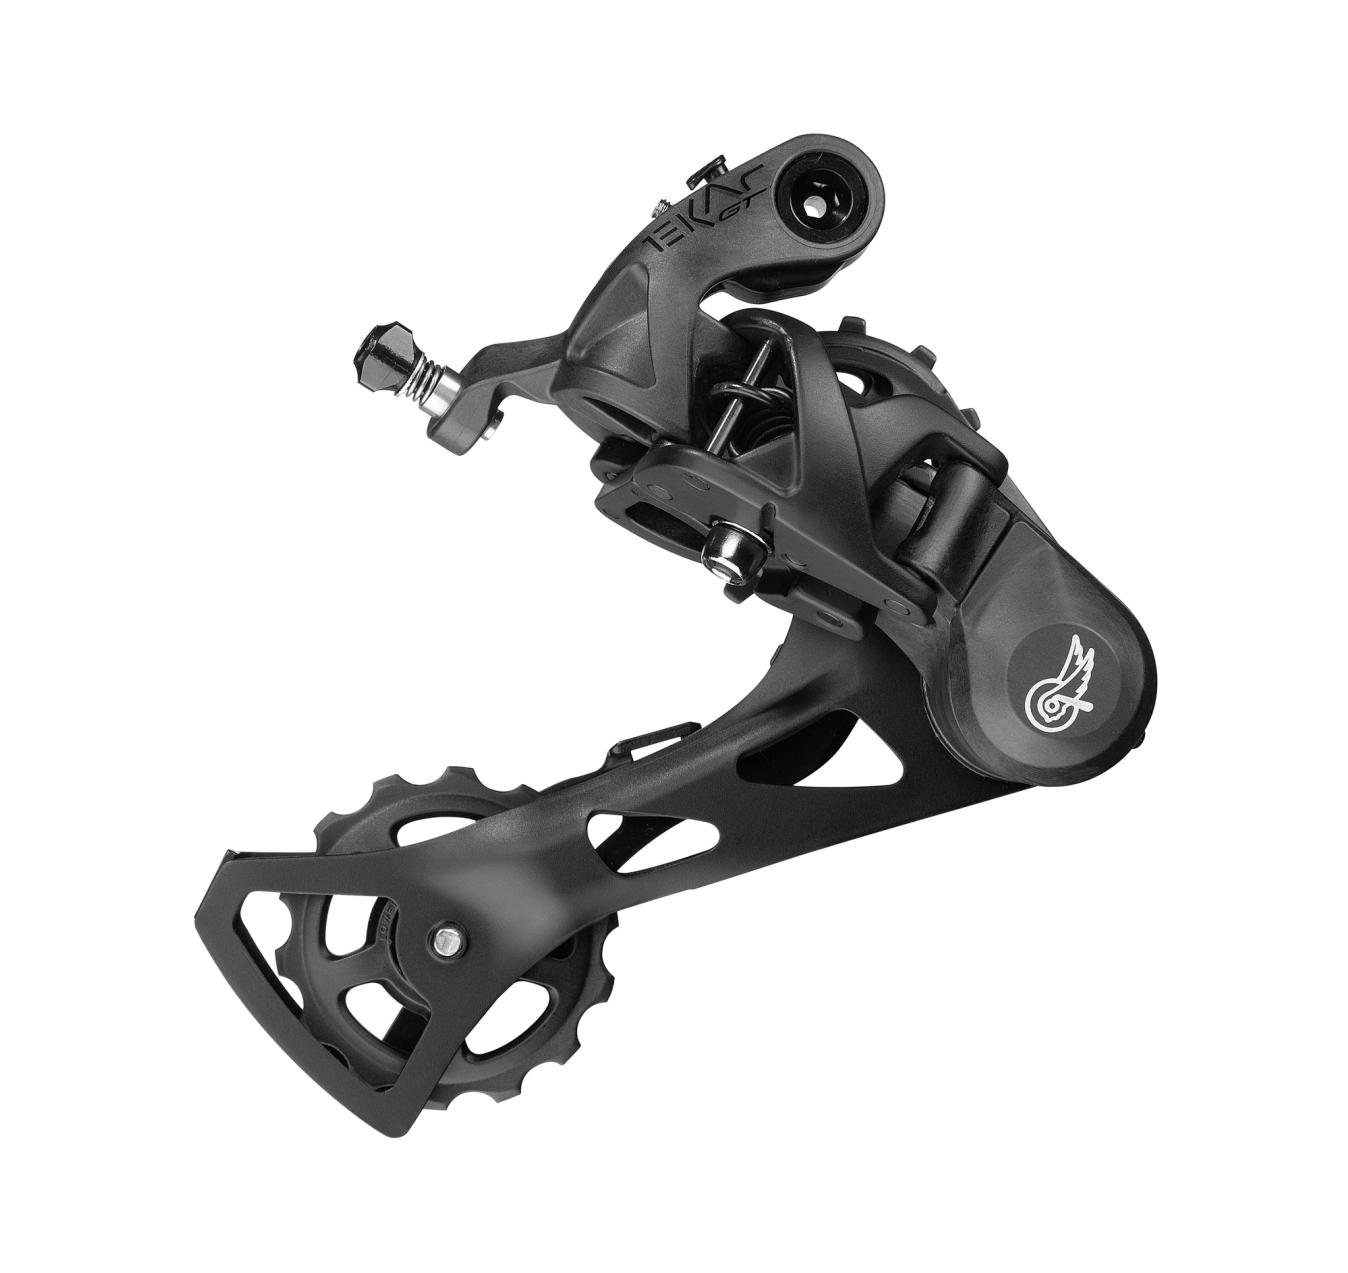 A single rear derailleur cage length accommodates all the cassette and chain ring ranges making it very easy to live with